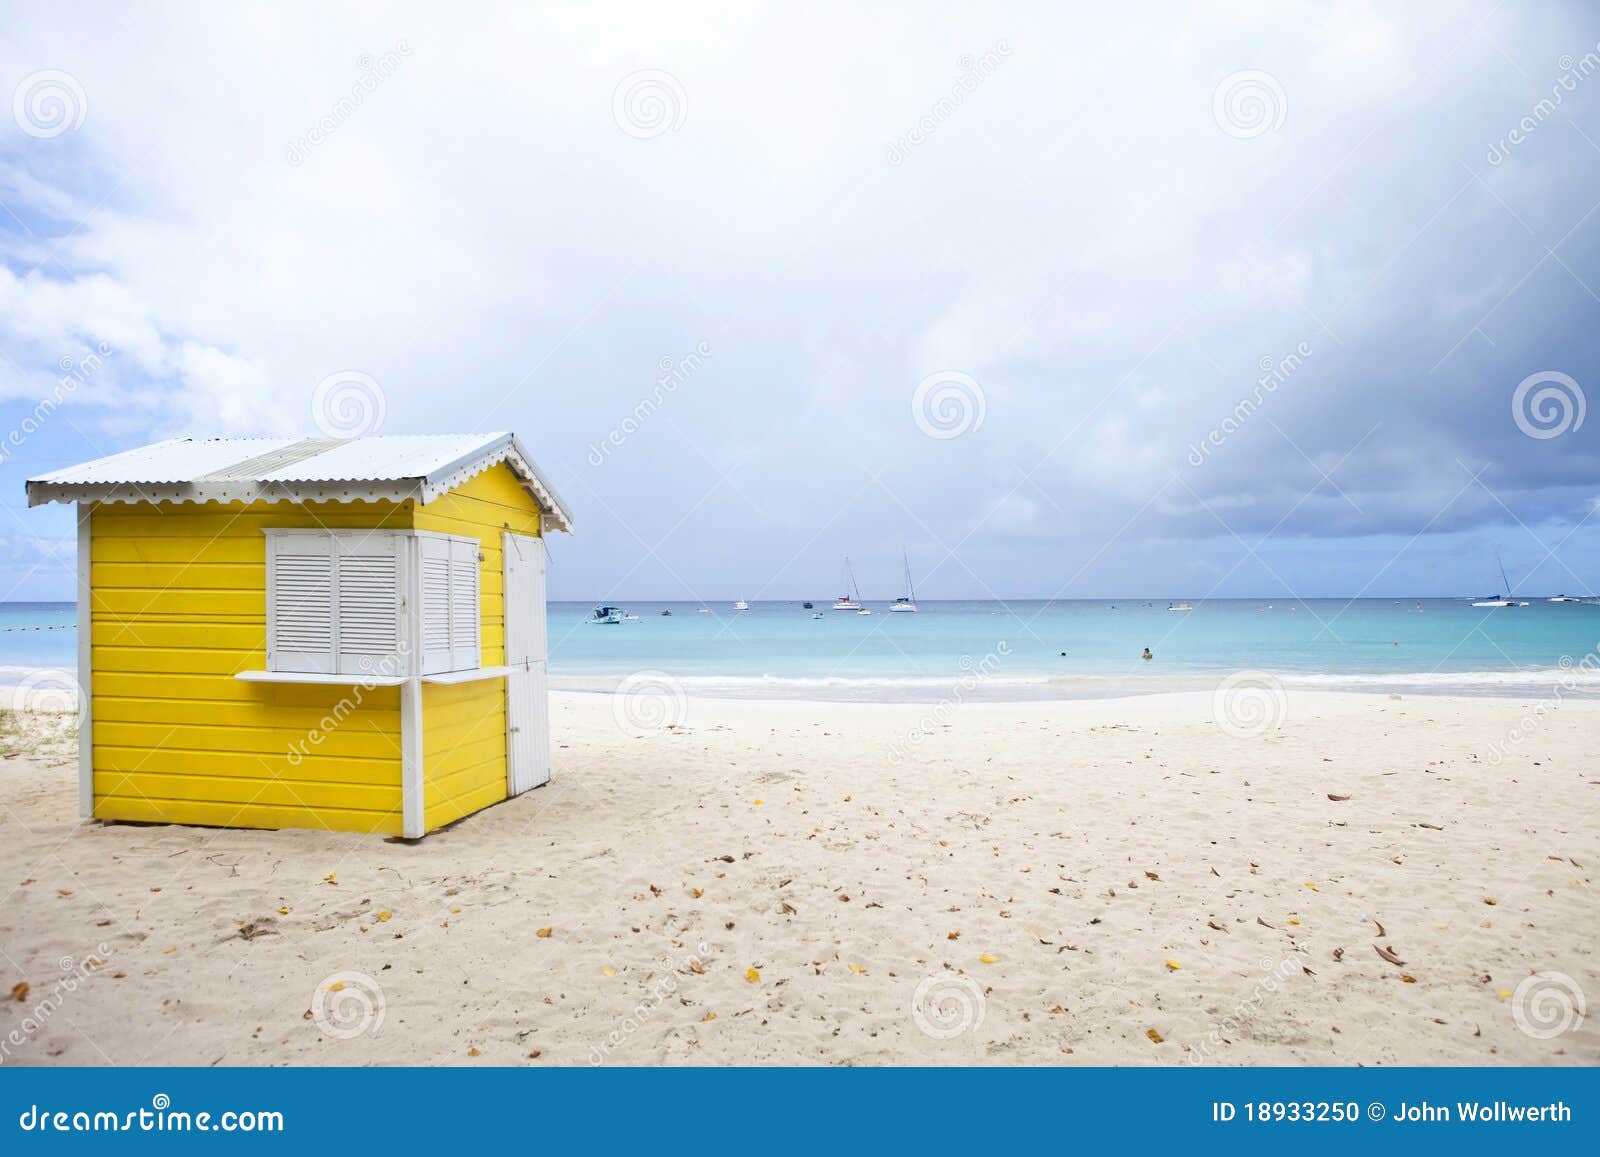 Beach hut, barbados stock photo. Image of sand, colourful - 18933250